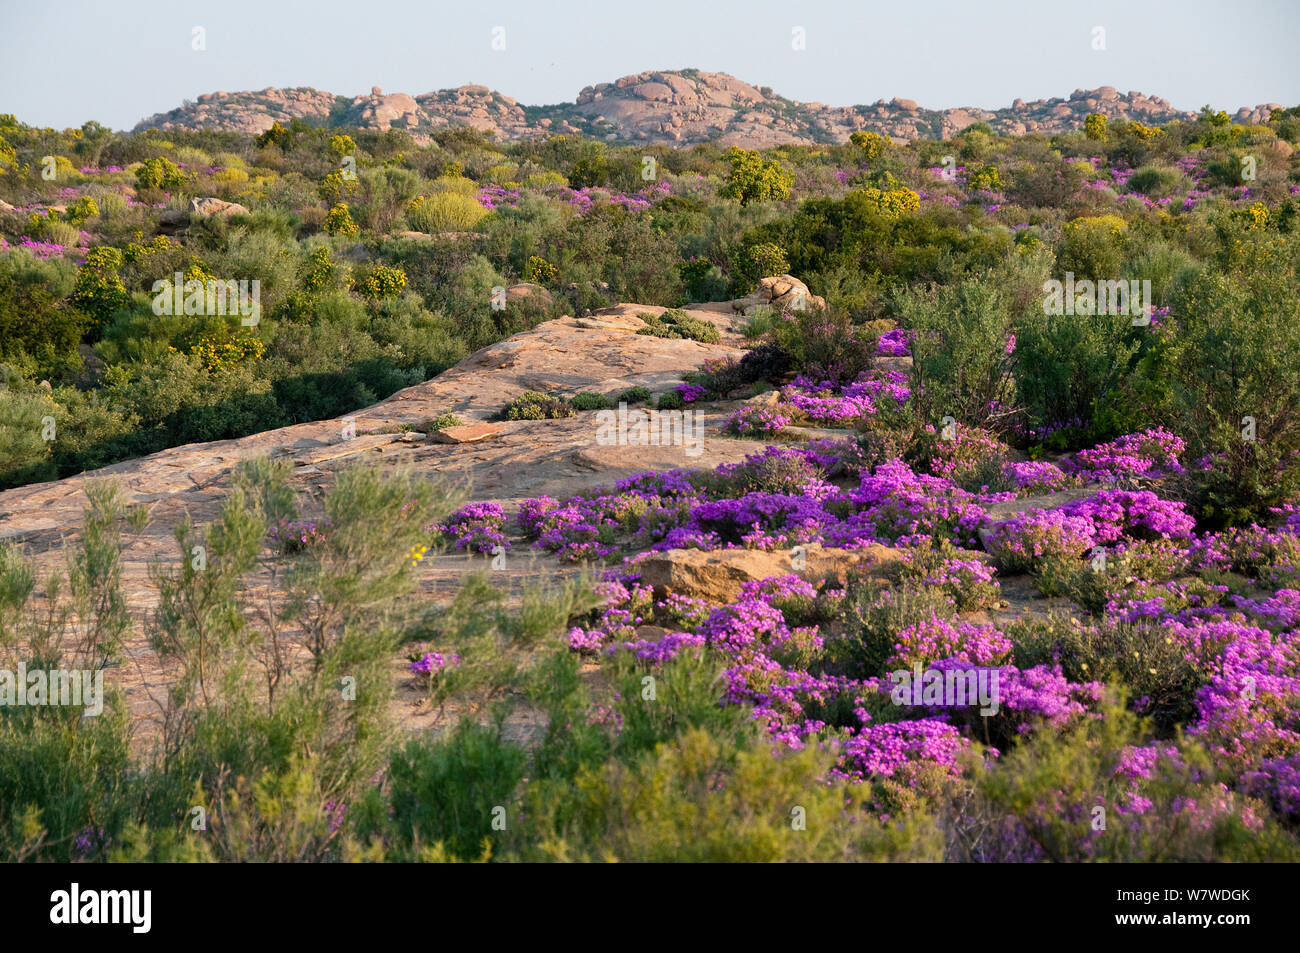 Fynbos in flower including Ice plants (Drosanthemum hispidum) Namaqualand, Northern Cape, South Africa, August. Stock Photo